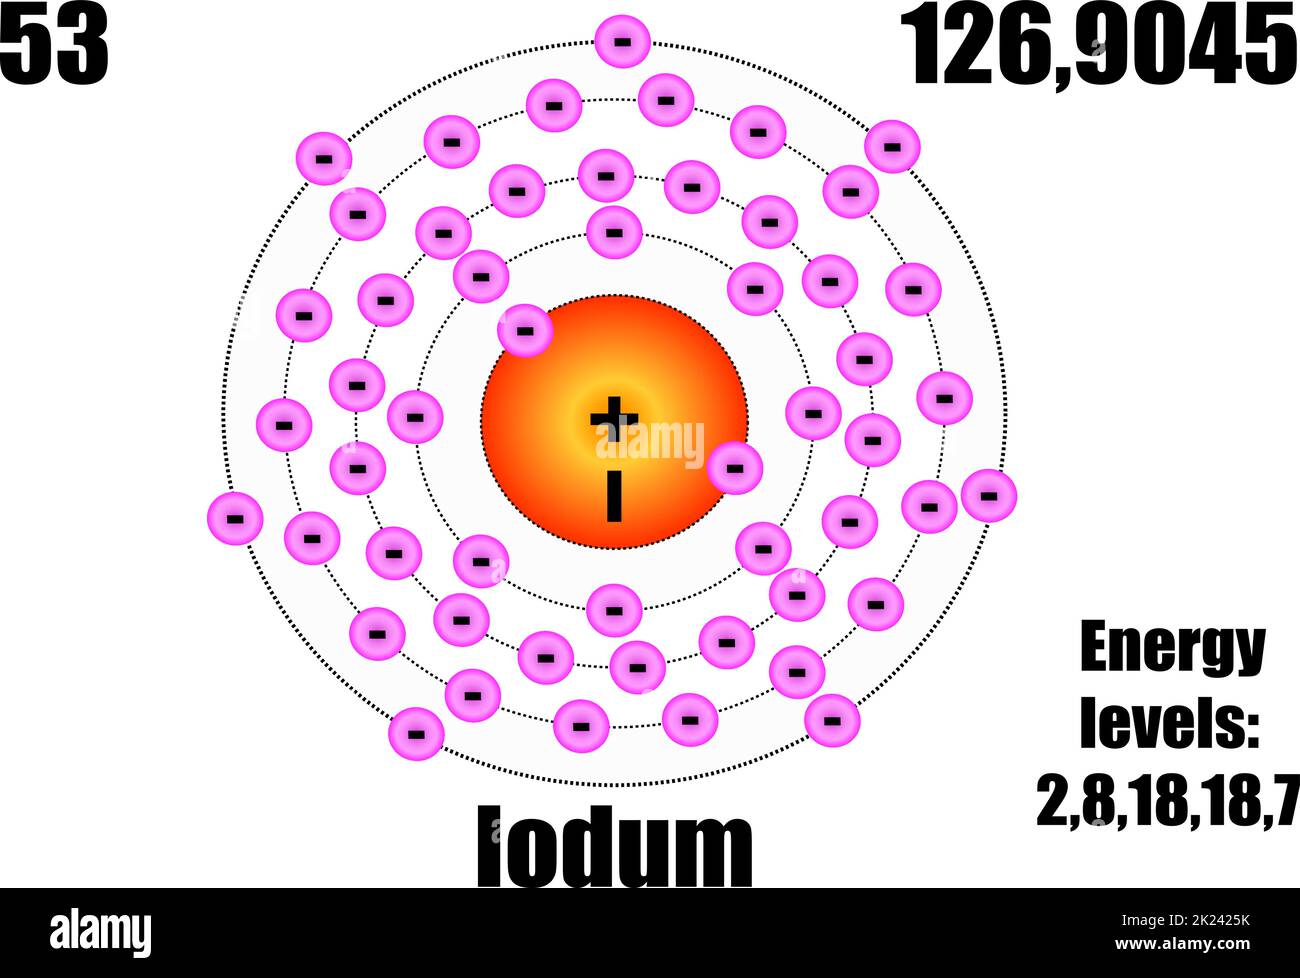 Iodine atom, with mass and energy levels. Vector illustration Stock Vector